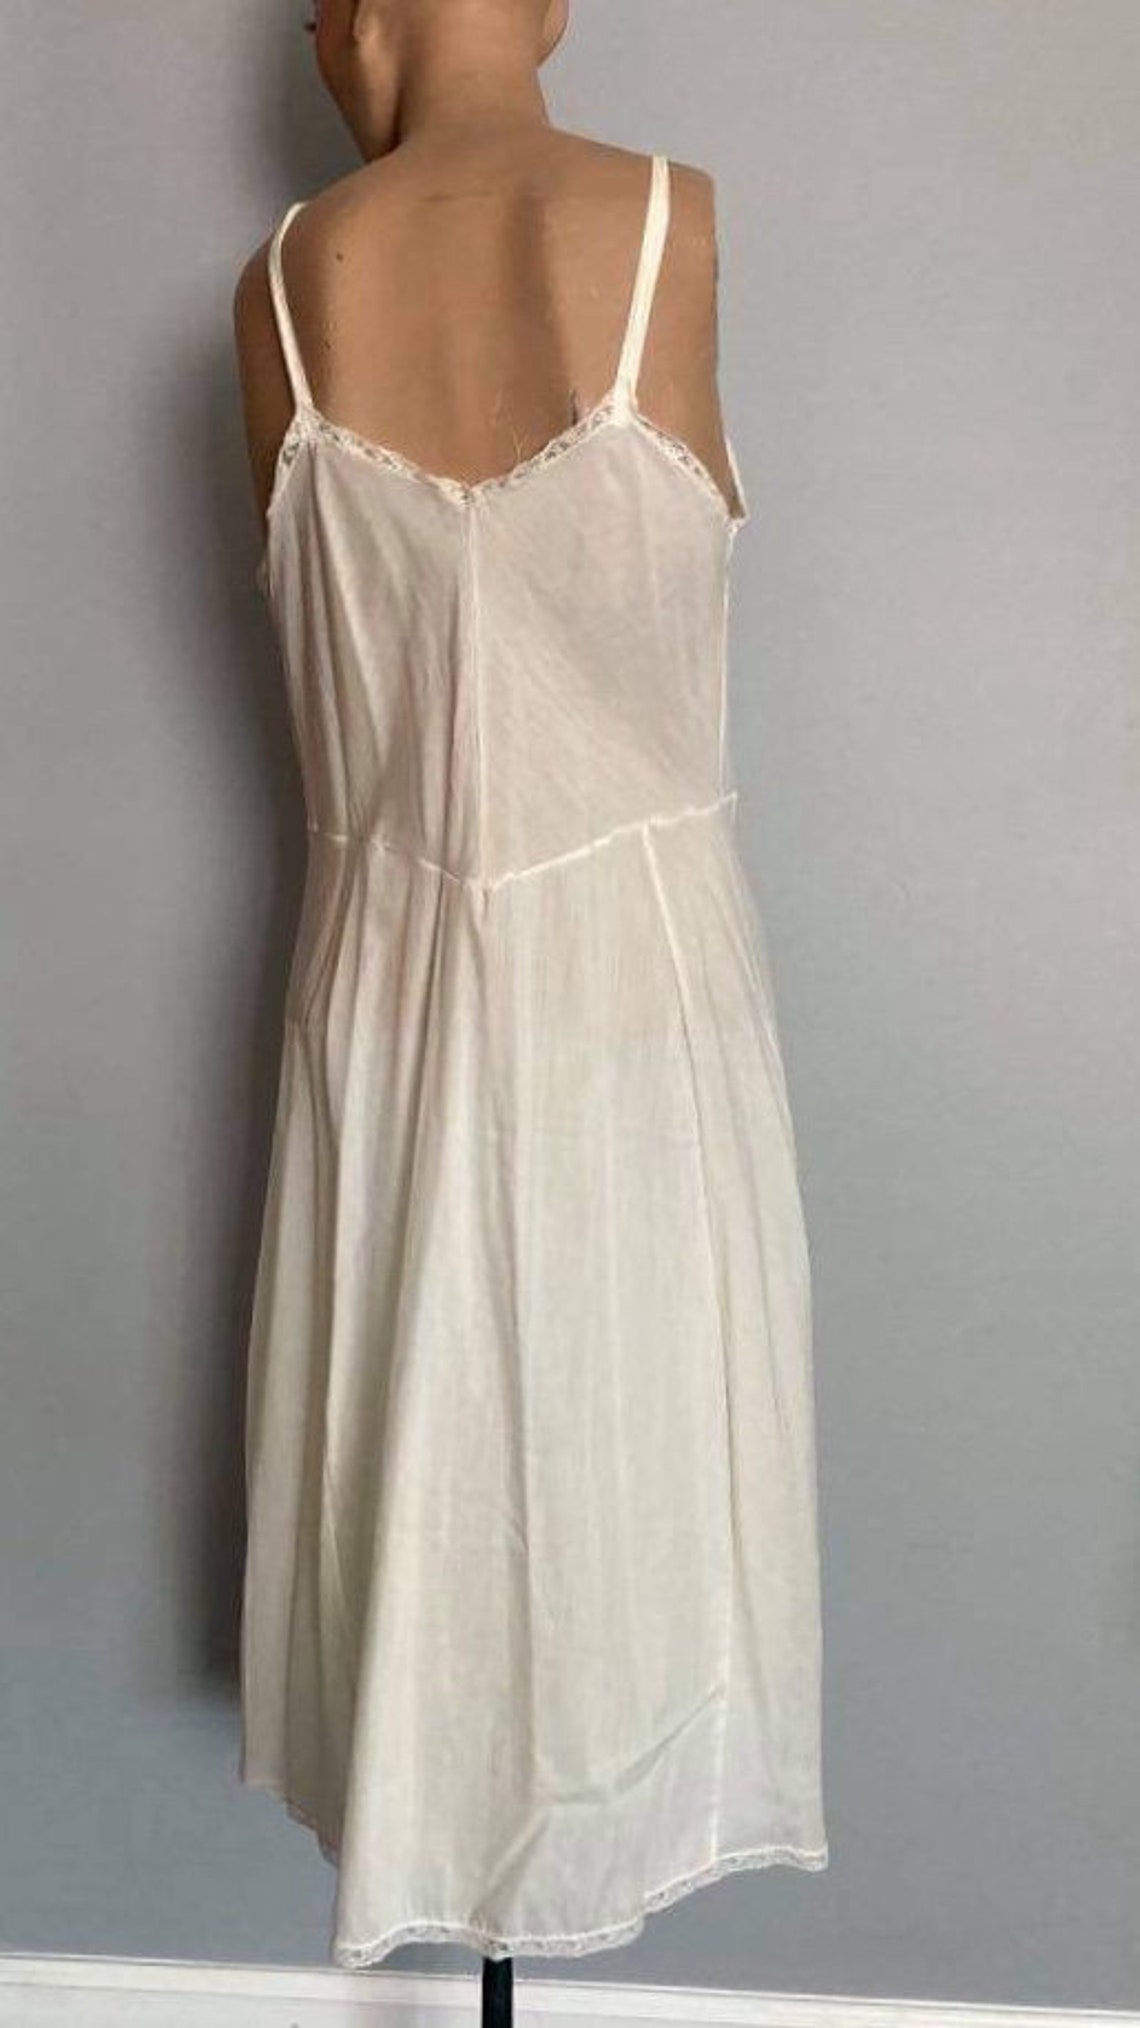 Vintage full slip by Artemis size 34 style 8901 off white with | Etsy